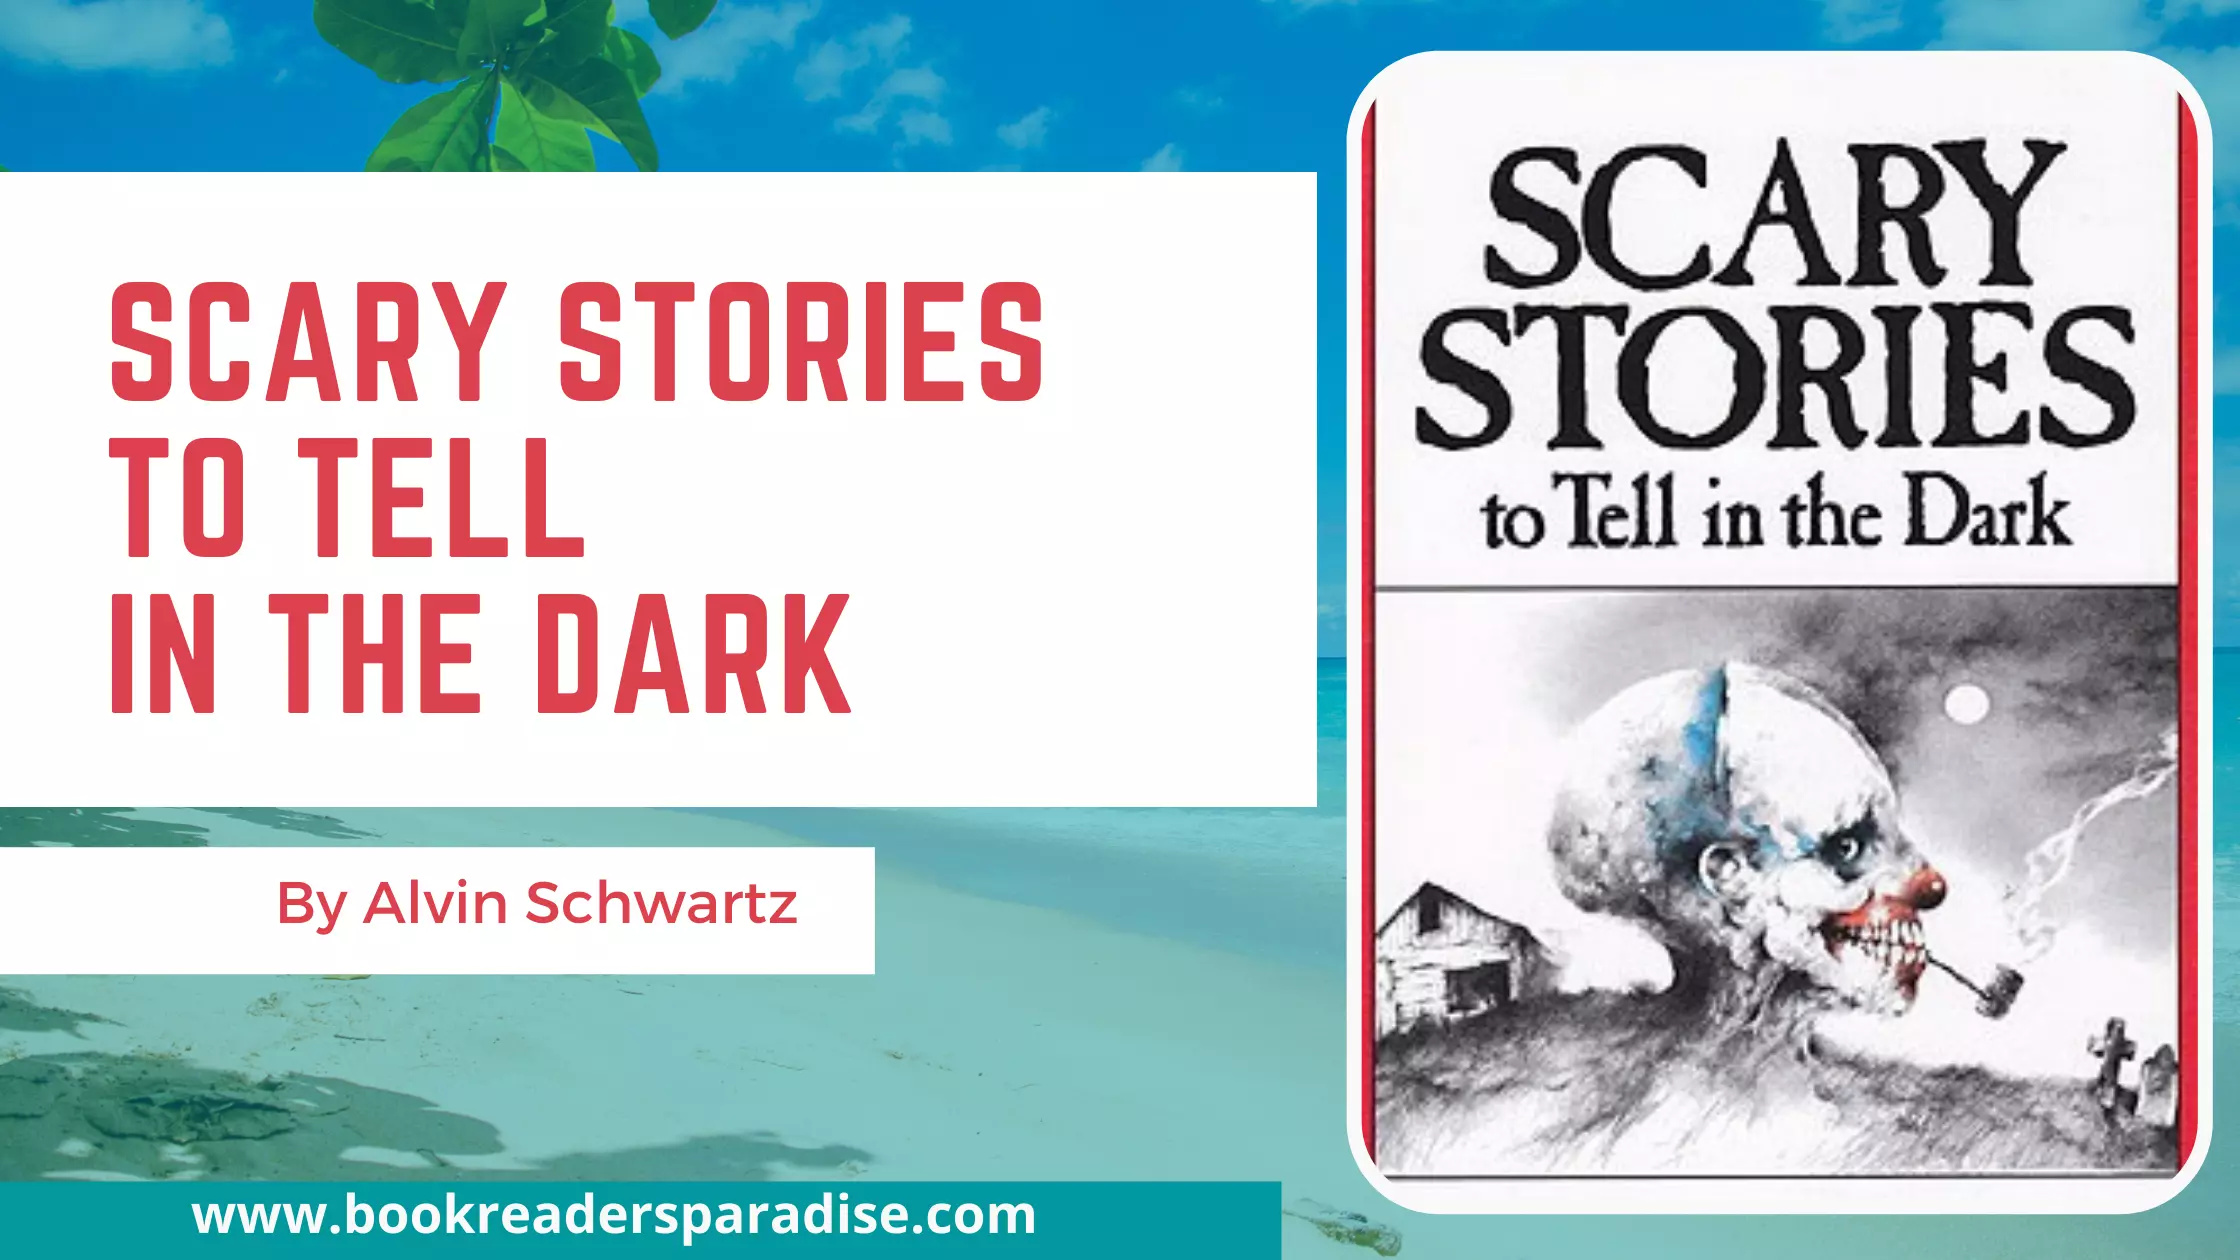 Scary Stories To Tell In The Dark PDF FREE Download By Alvin Schwartz